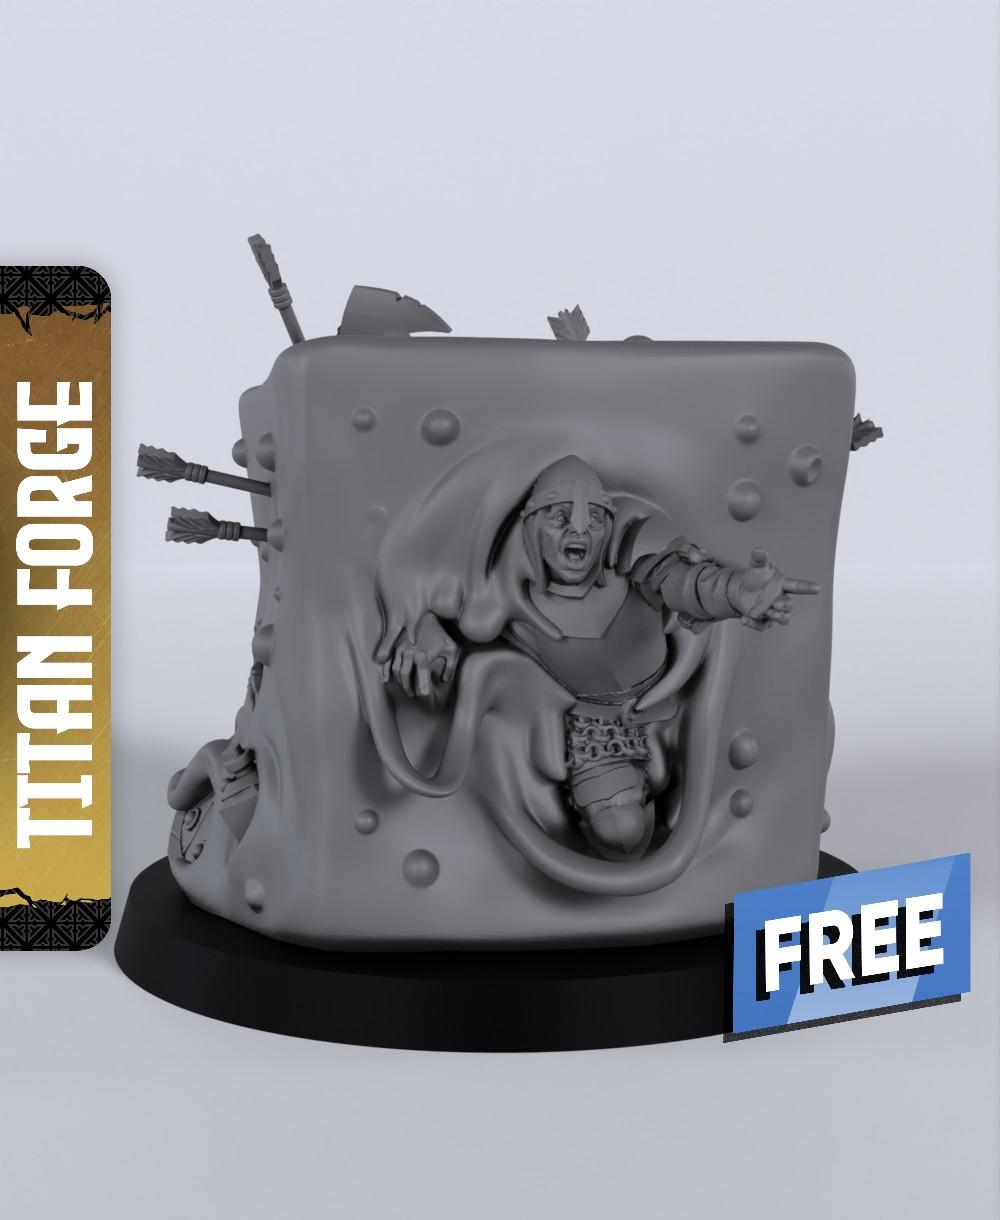 Gelatinous Cube - With Free Dragon Warhammer - 5e DnD Inspired for RPG and Wargamers 3d model